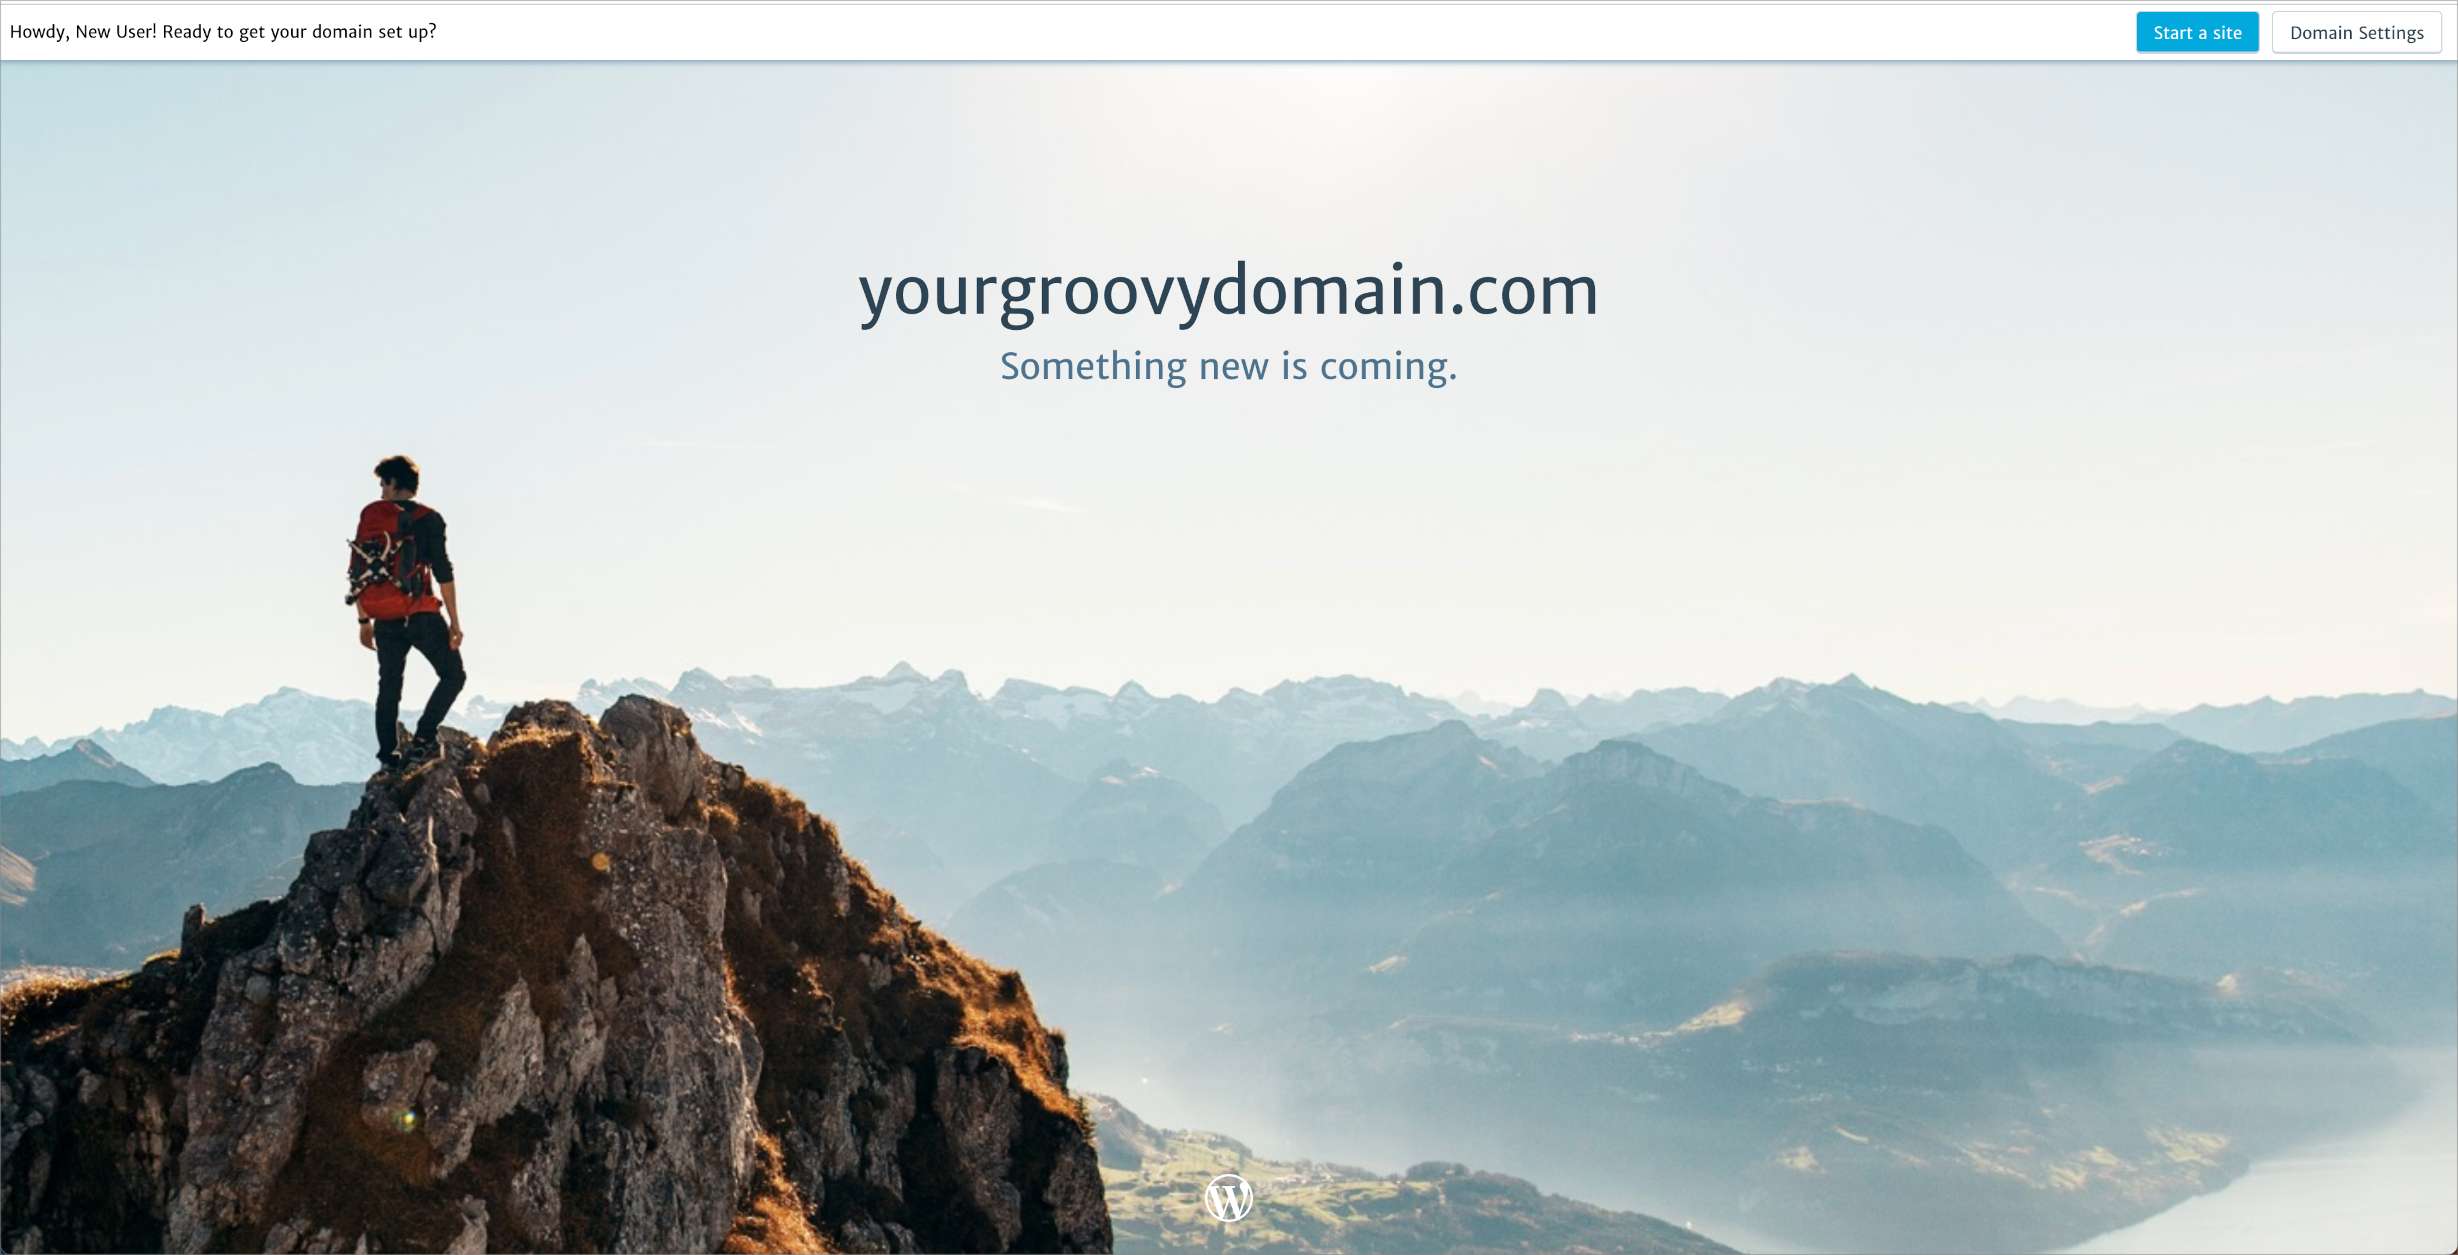 The domain landing page, showing the domain name and the text "somehting new is coming."